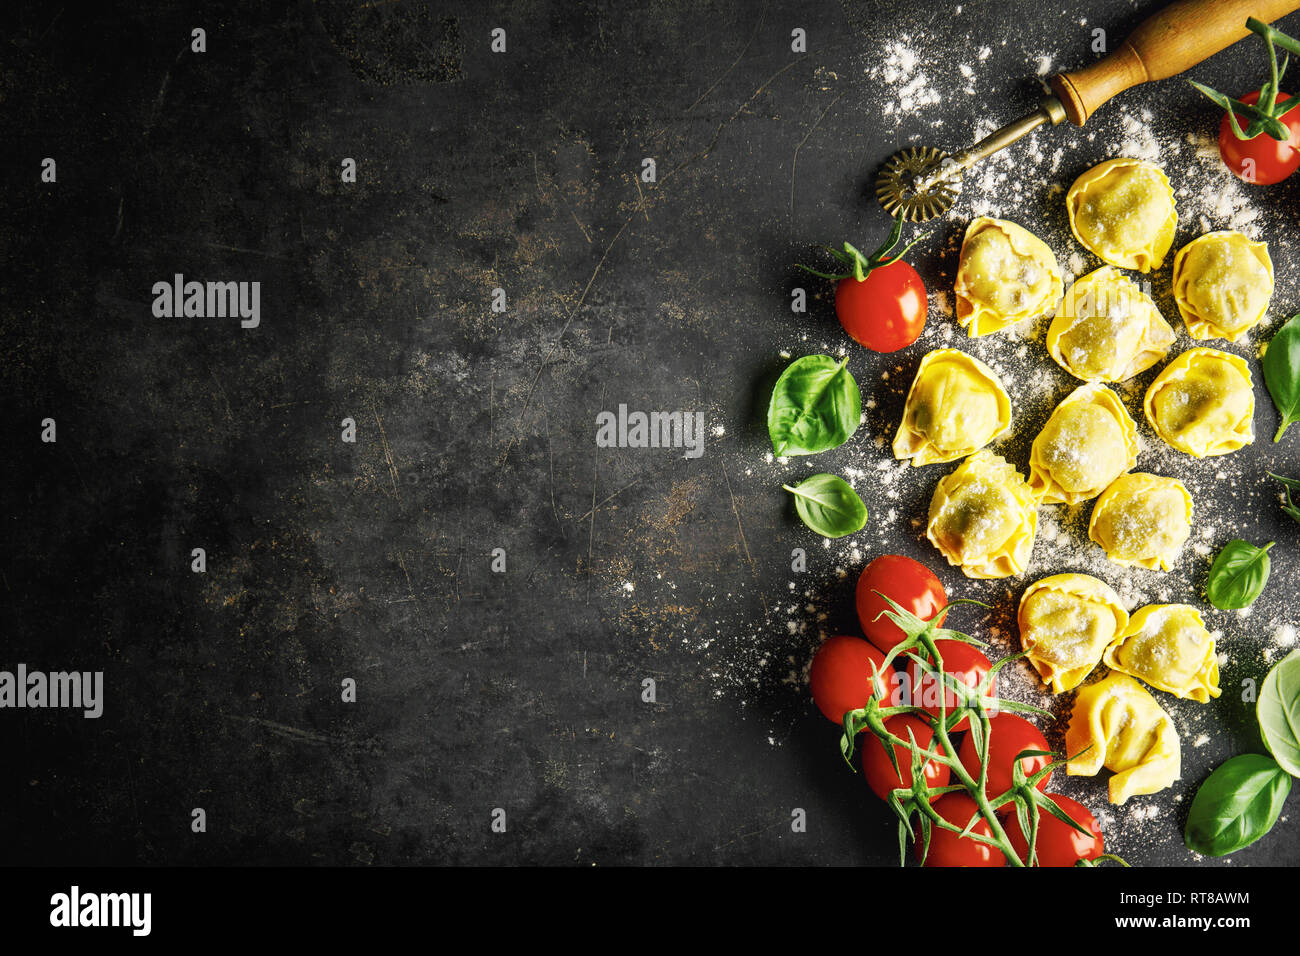 Food background. Italian food background with ravioli, tomatoes, olives and basil on dark background. Horizontal with copy space. Stock Photo